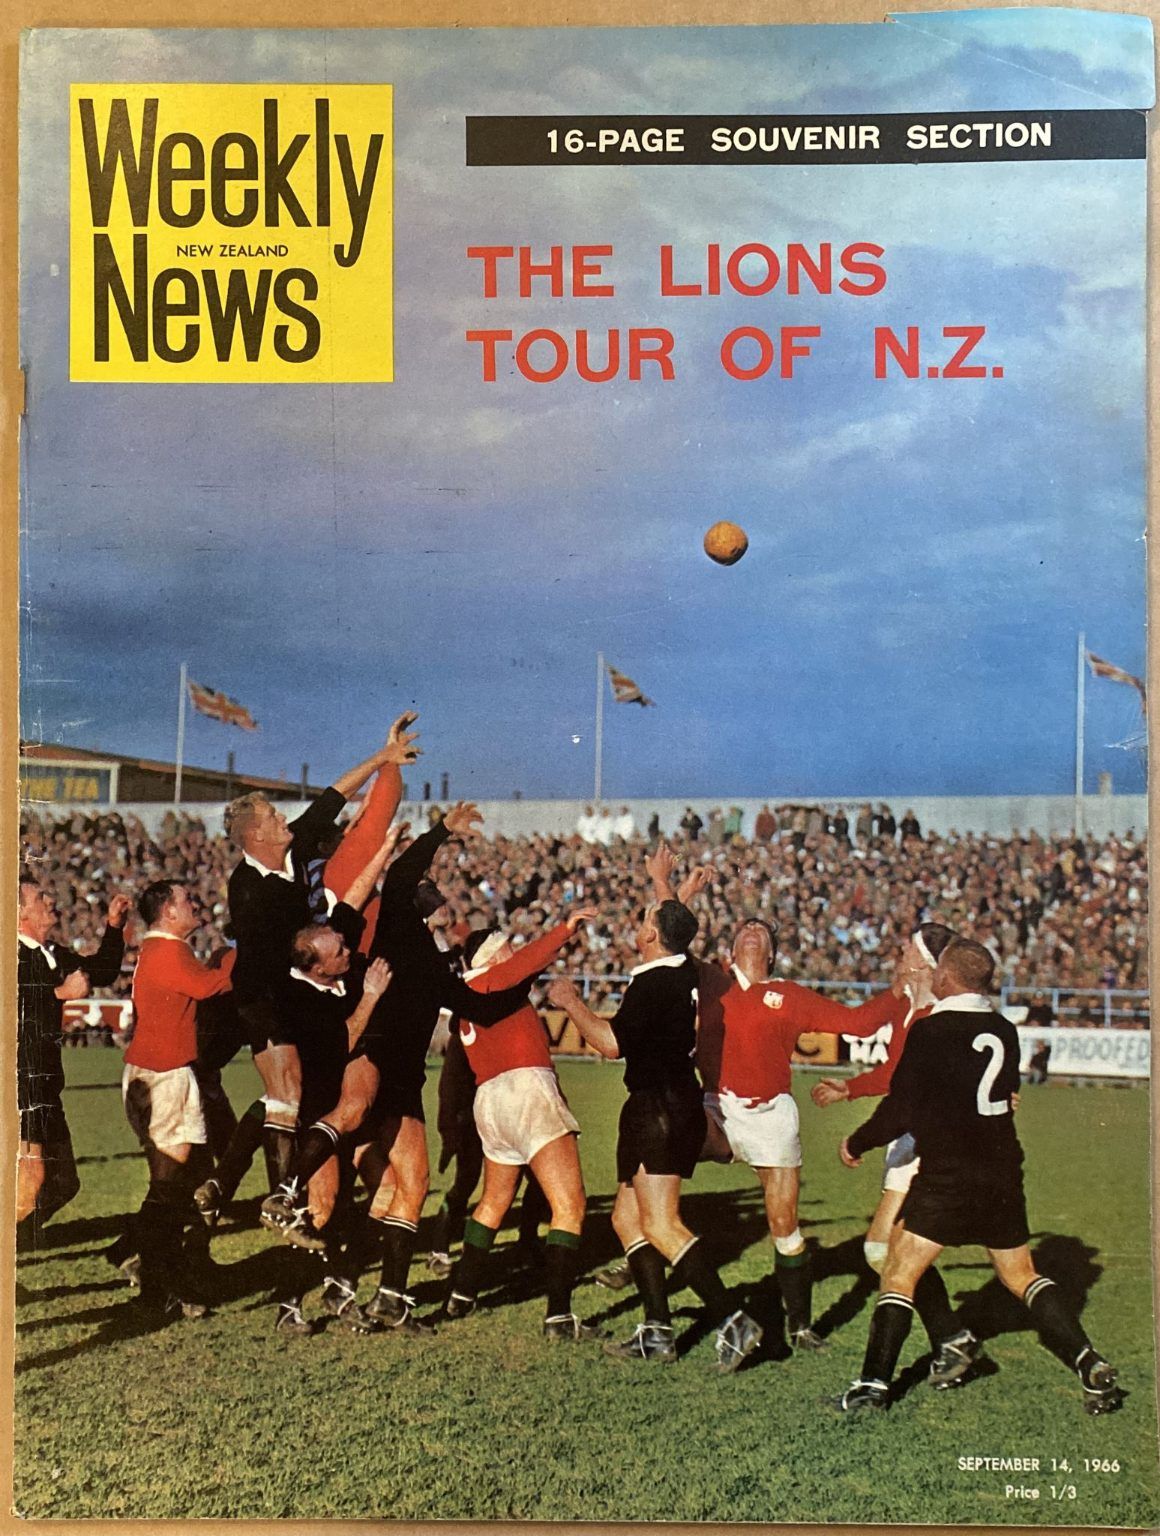 OLD NEWSPAPER: New Zealand Weekly News, No. 5364, 14 September 1966